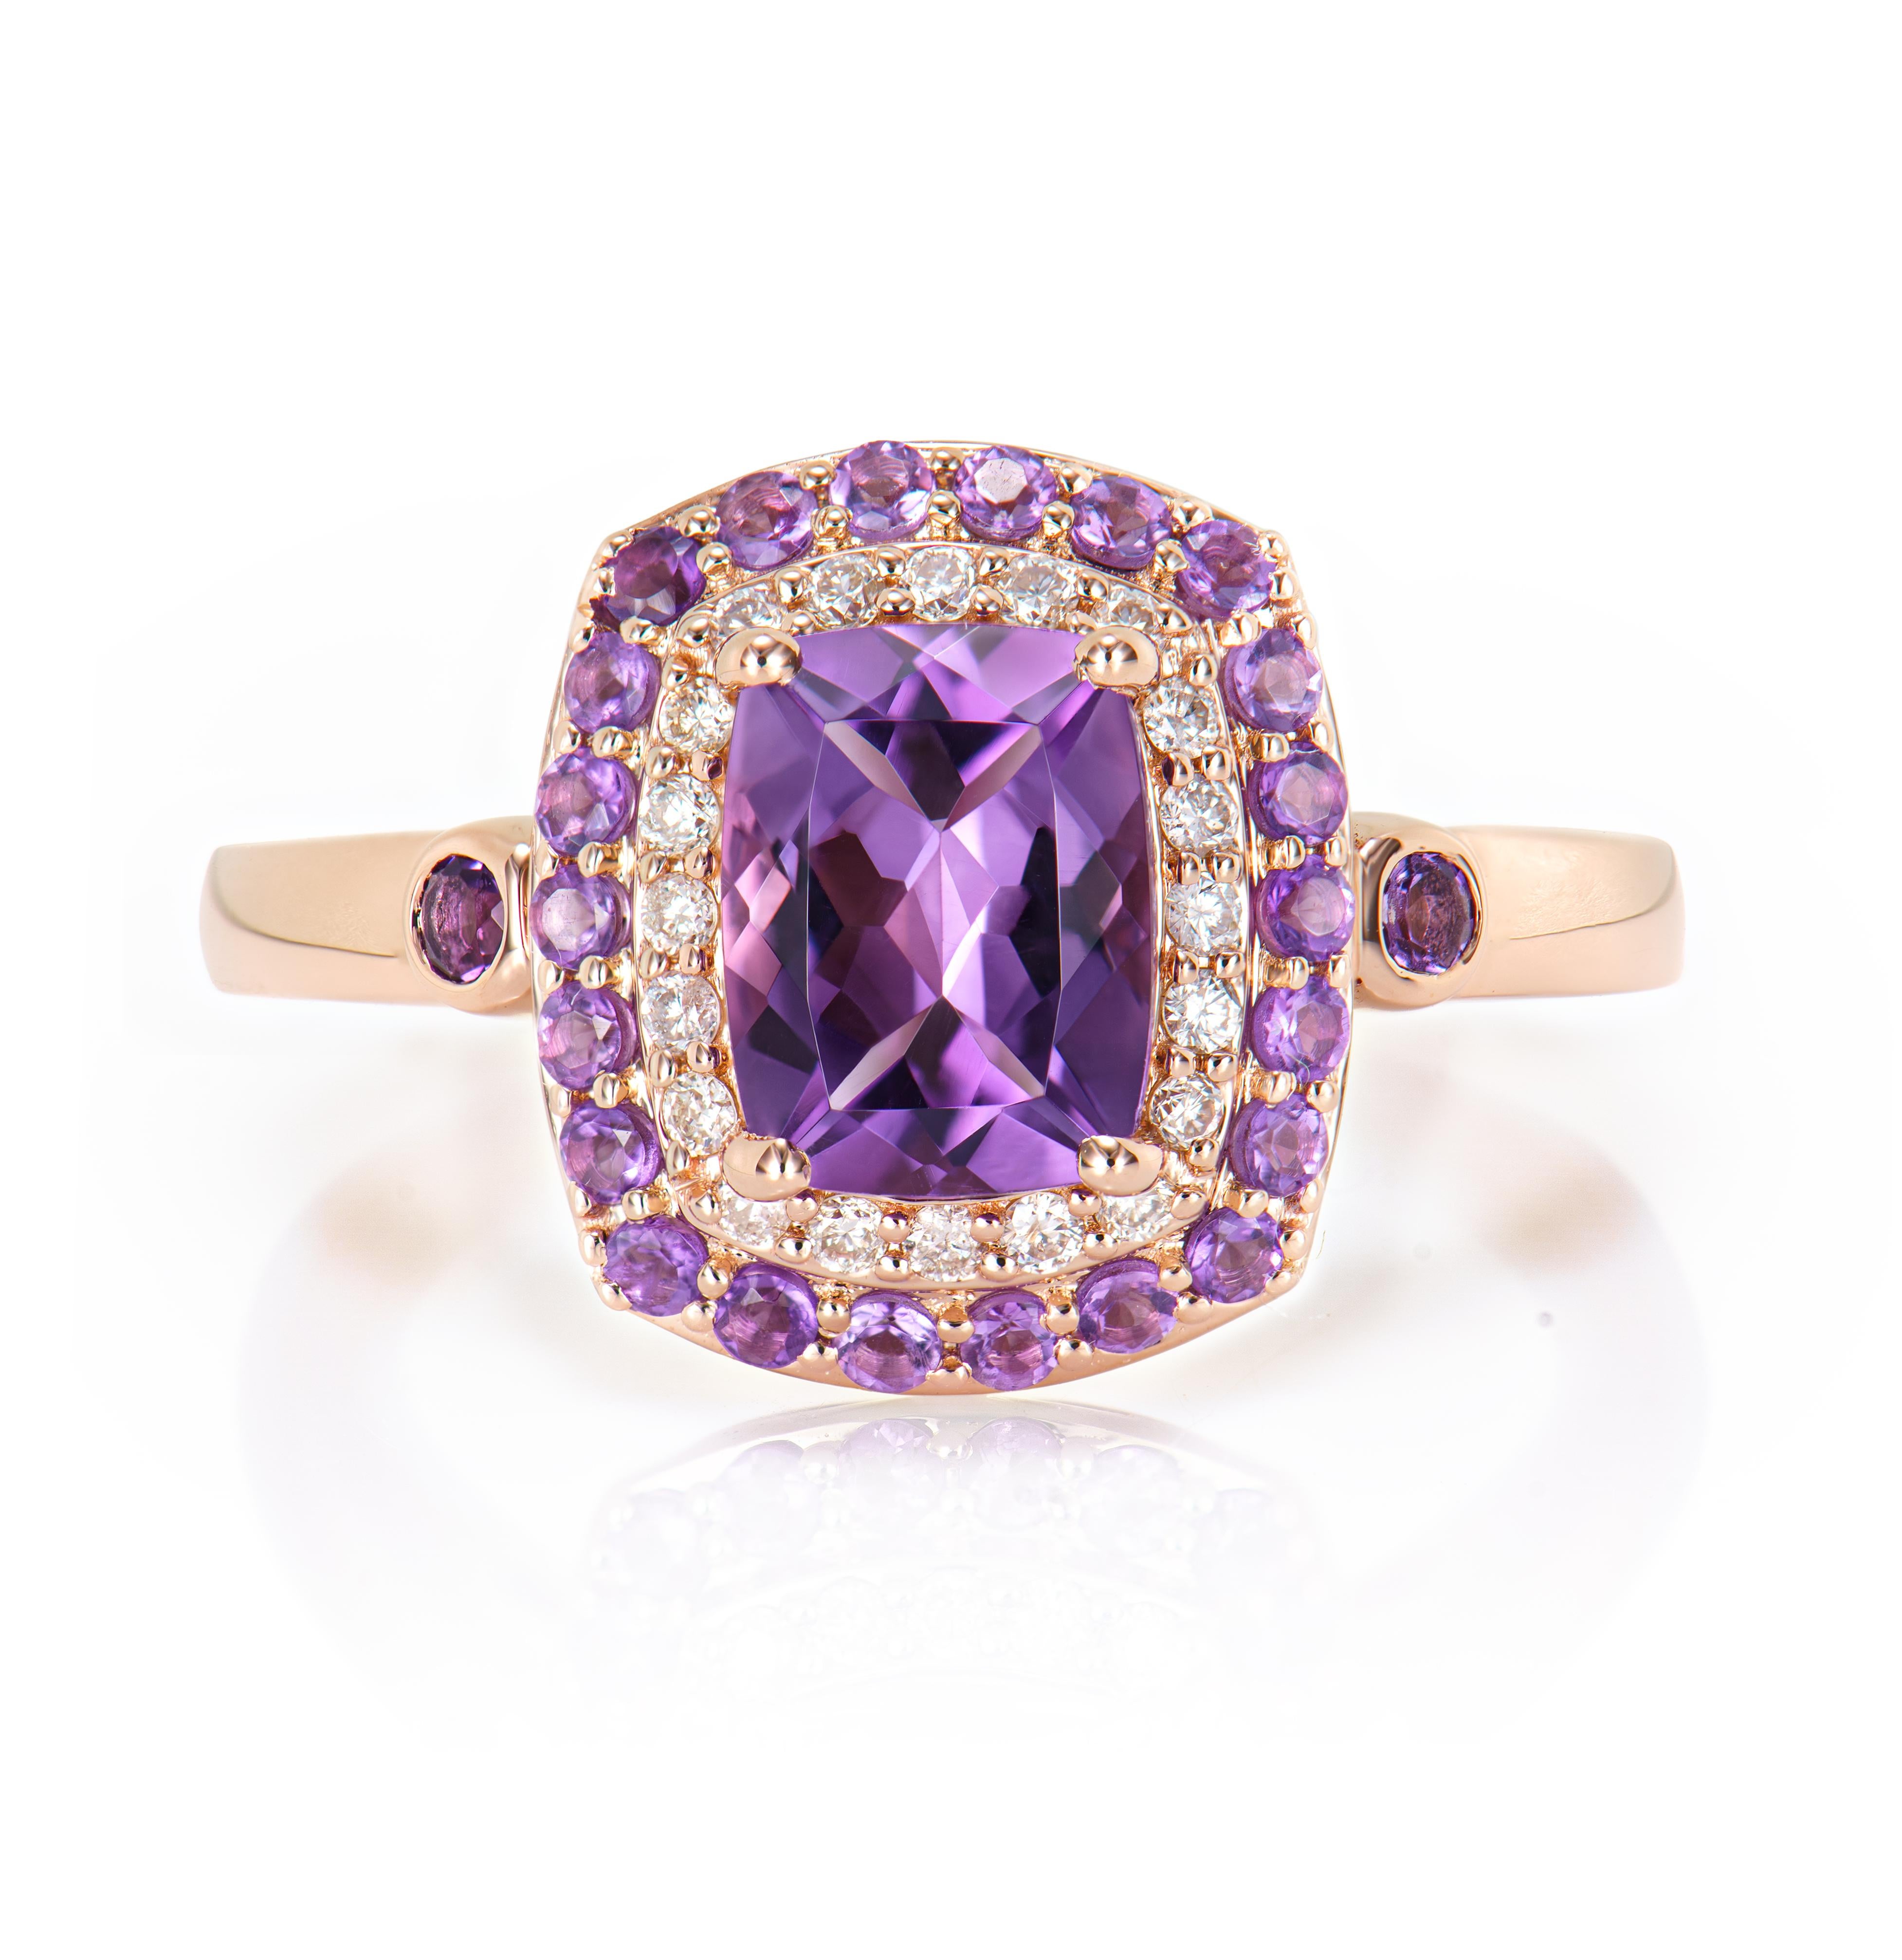 Contemporary 1.31 Carat Amethyst Fancy Ring in 14Karat Rose Gold with White Diamond.   For Sale